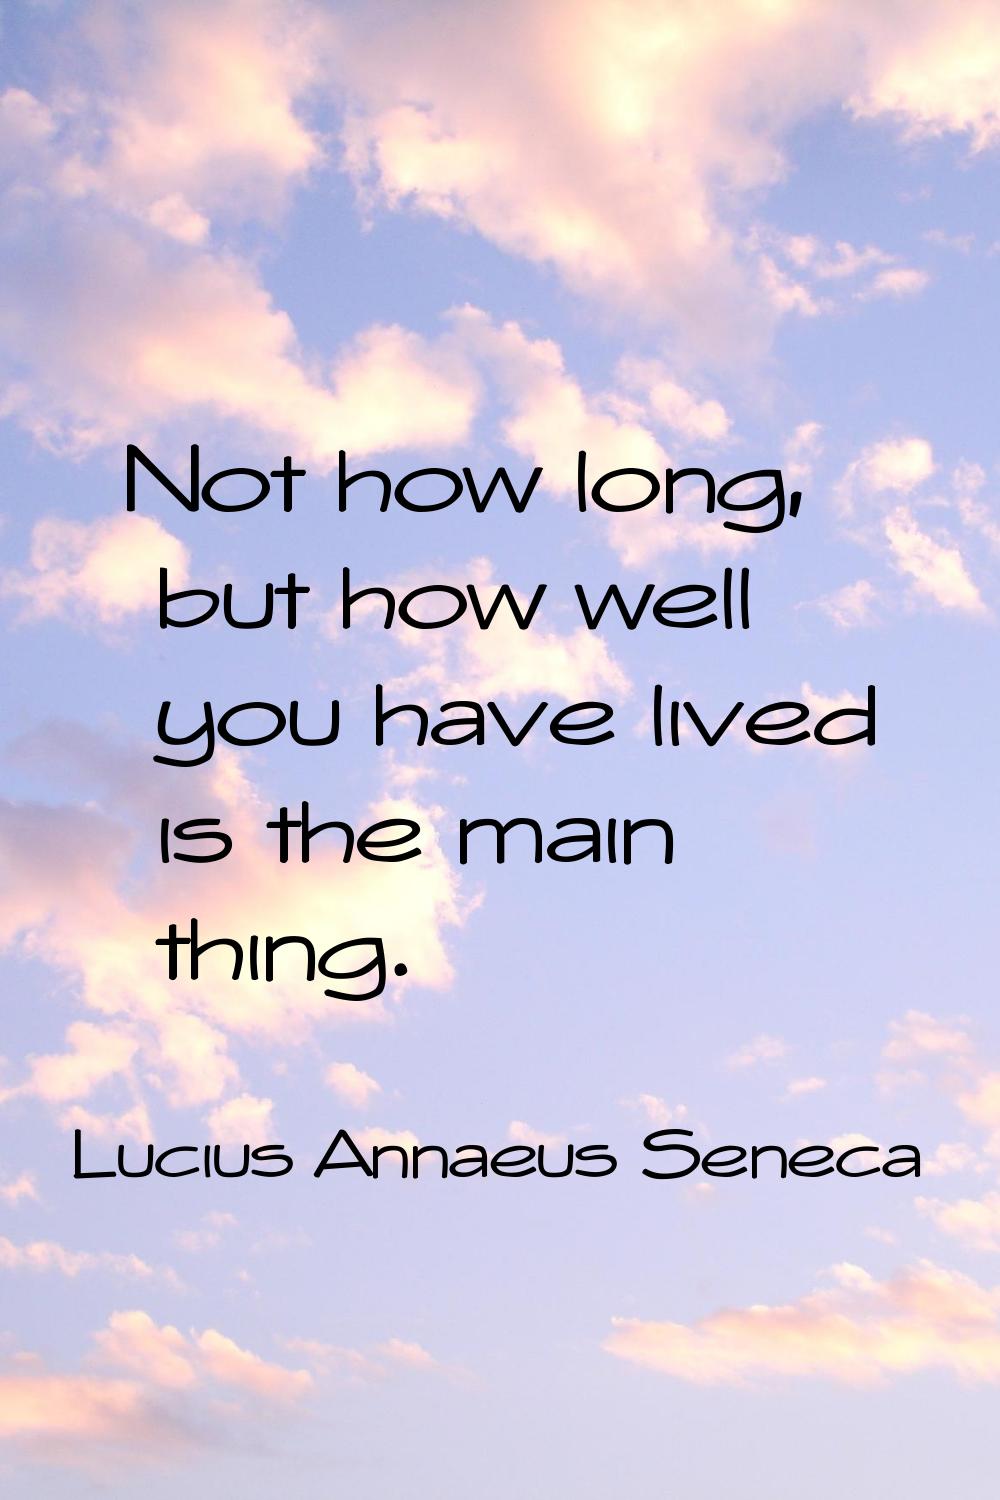 Not how long, but how well you have lived is the main thing.